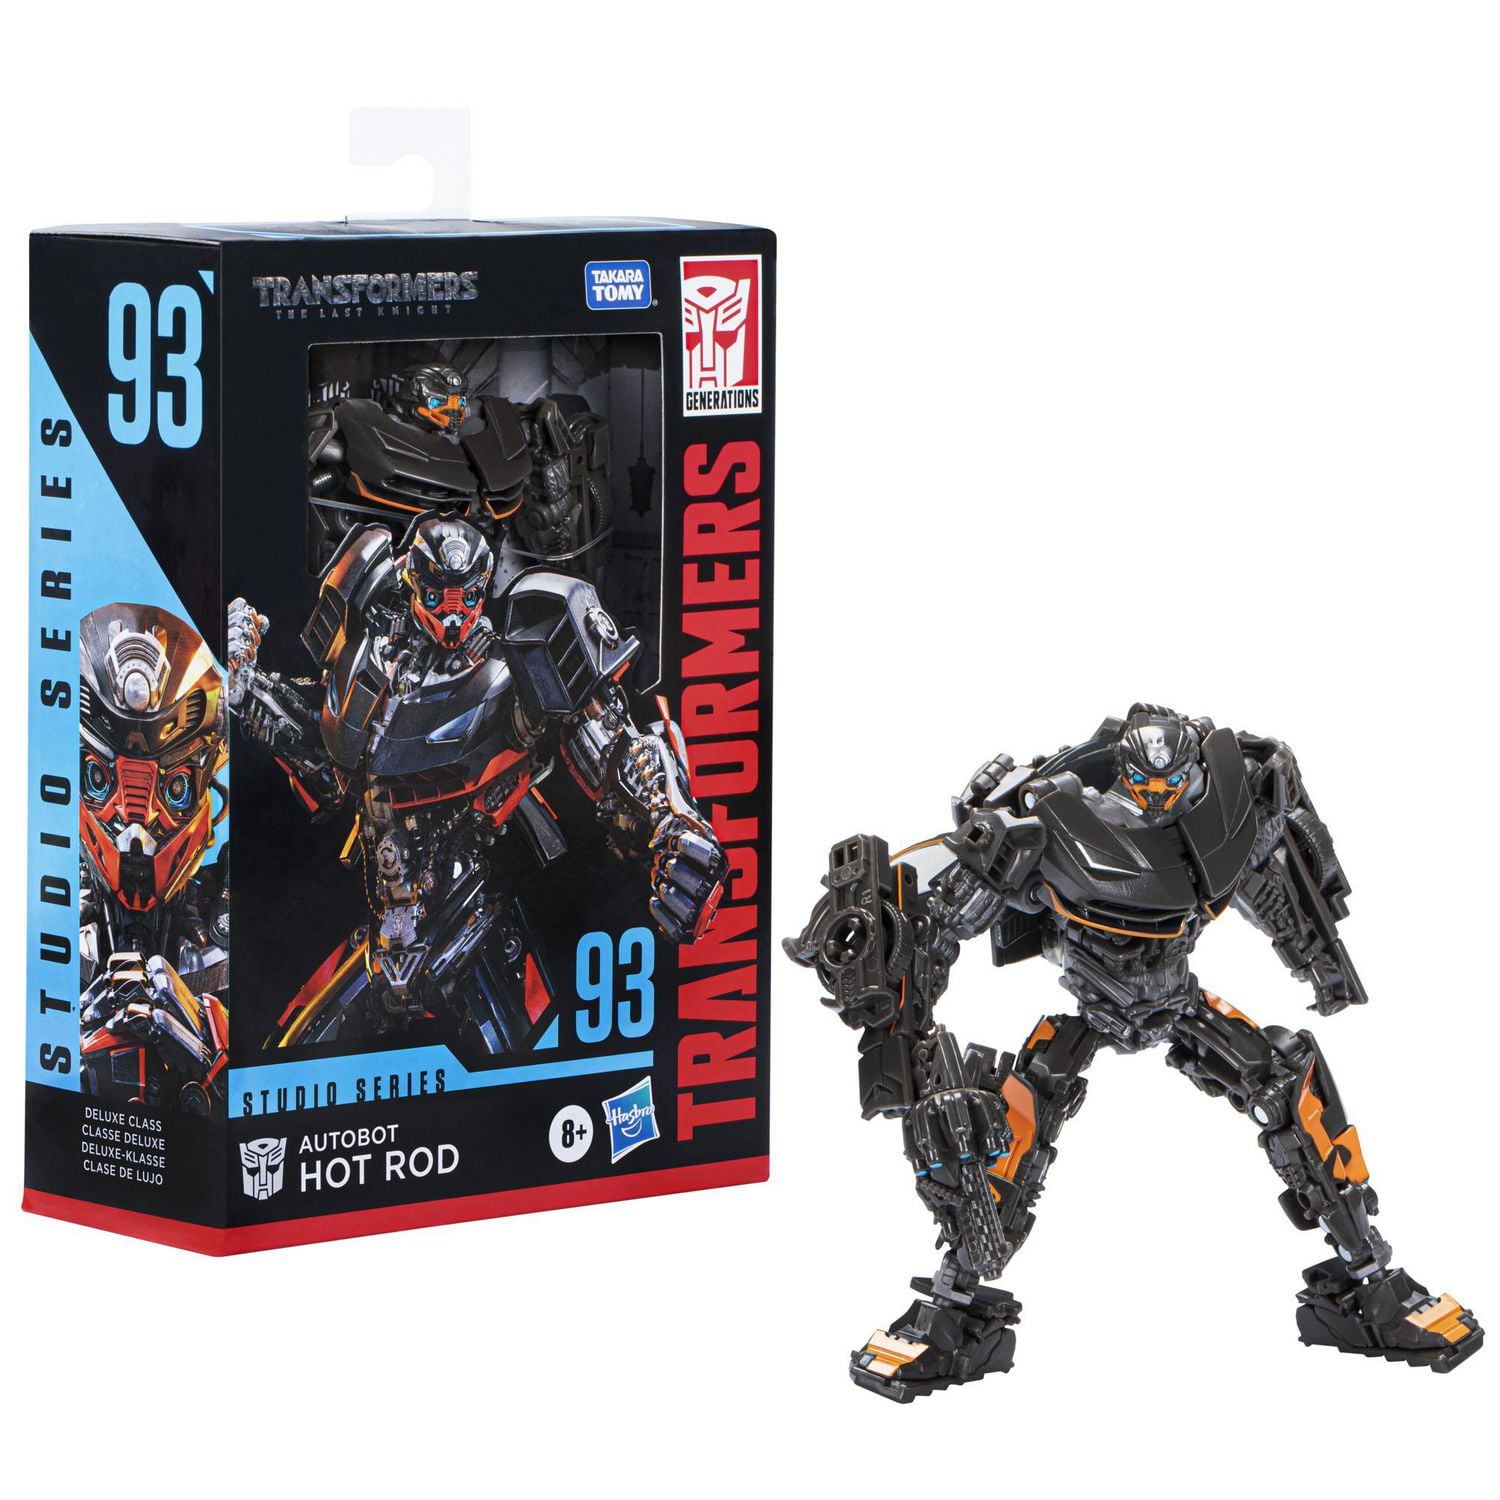 Transformers Toys Studio Series 93 Deluxe Transformers: The Last